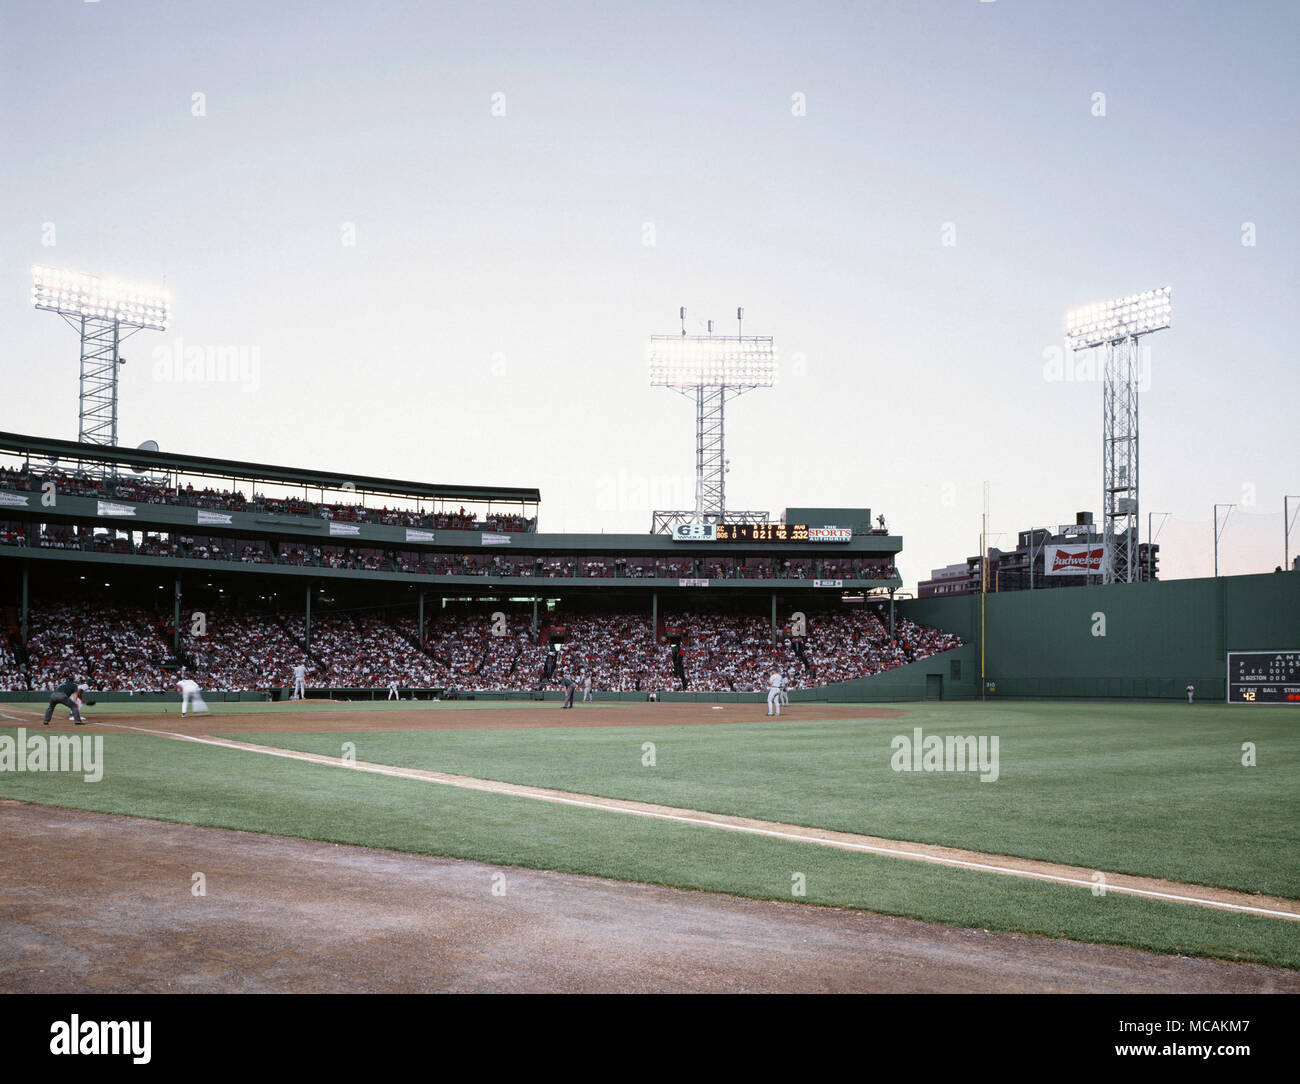 Fenway Park is a baseball park in Boston, Massachusetts, located at 4 Yawkey Way near Kenmore Square. It has been the home of the Boston Red Sox Major League Baseball team since it opened in 1912 and it is the oldest ballpark in major league baseball Stock Photo